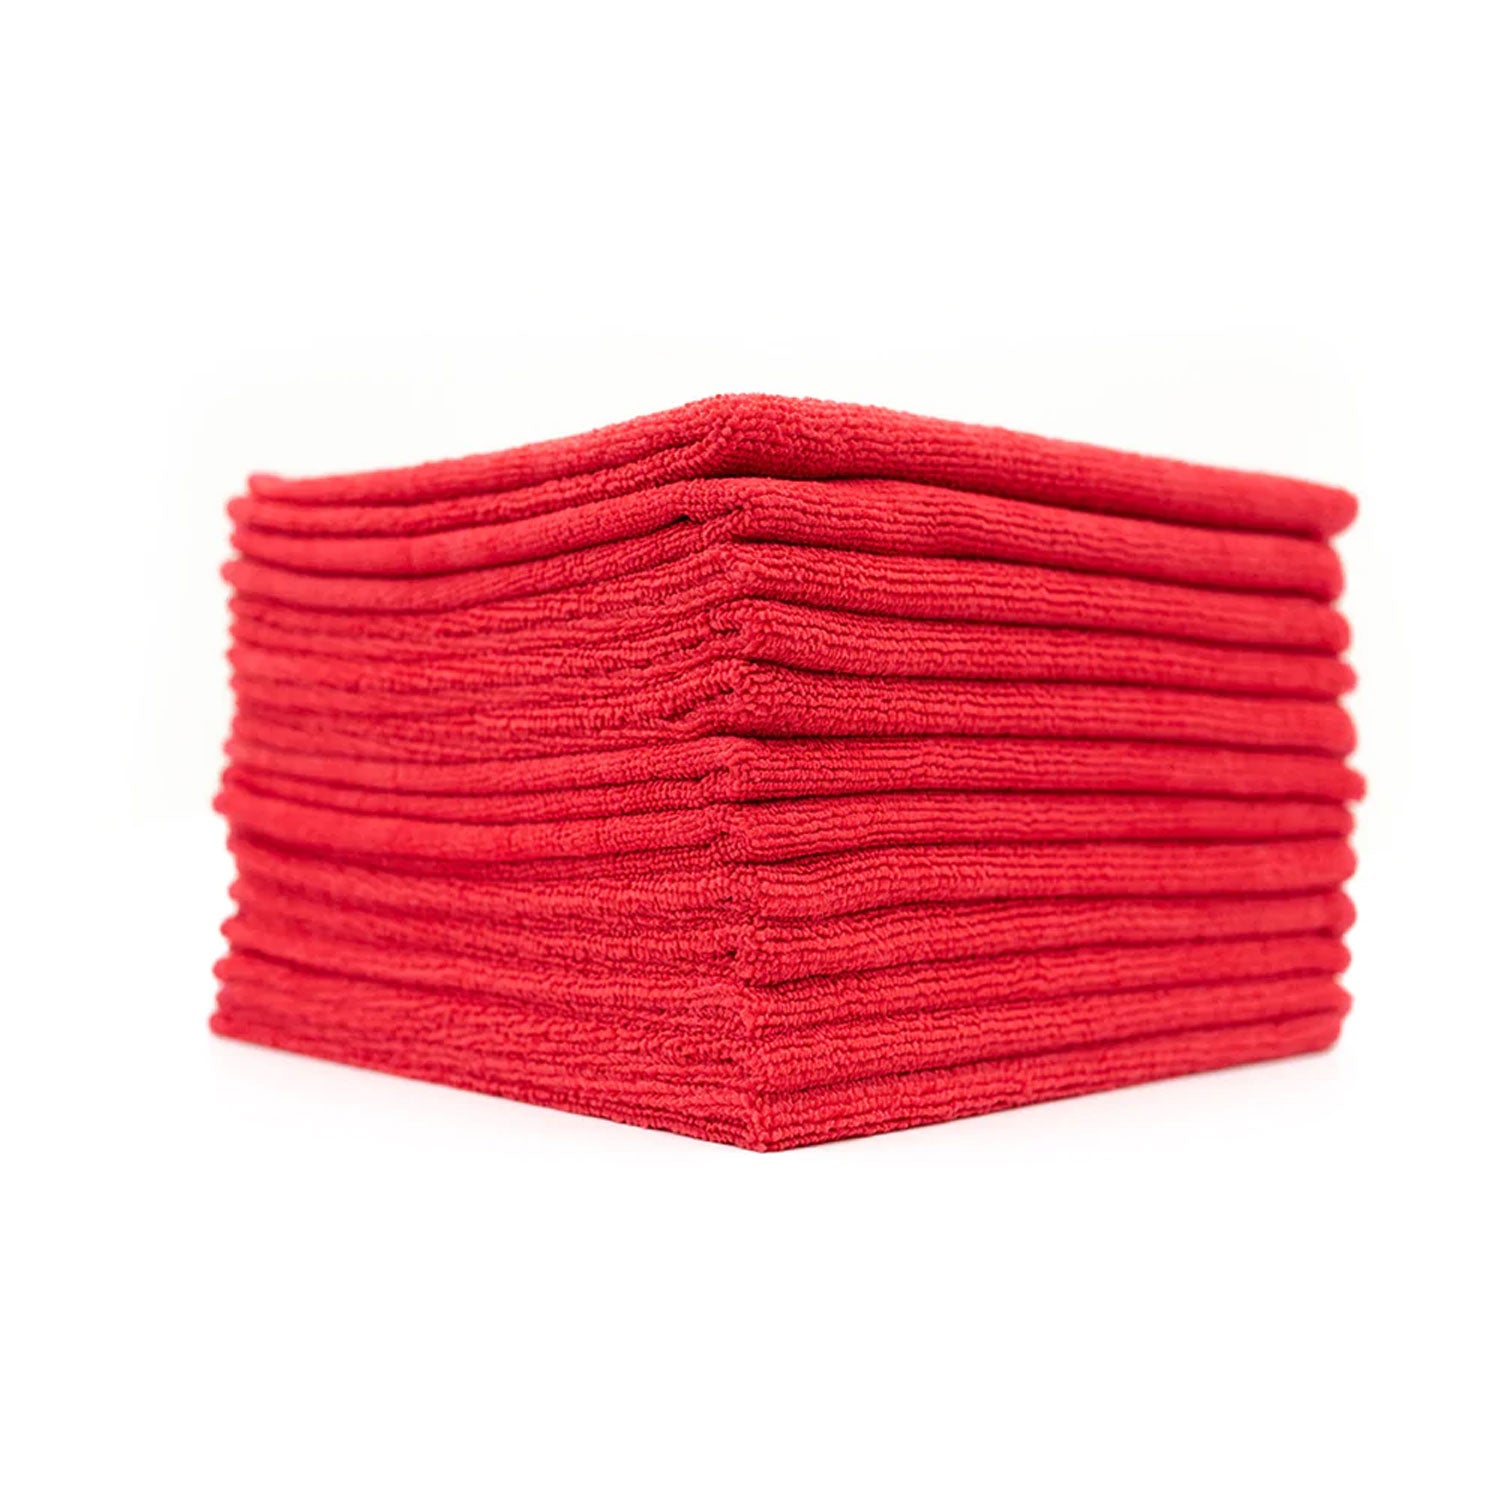 terry-cloth-microfiber-all-purpose-towels-12-pack-red